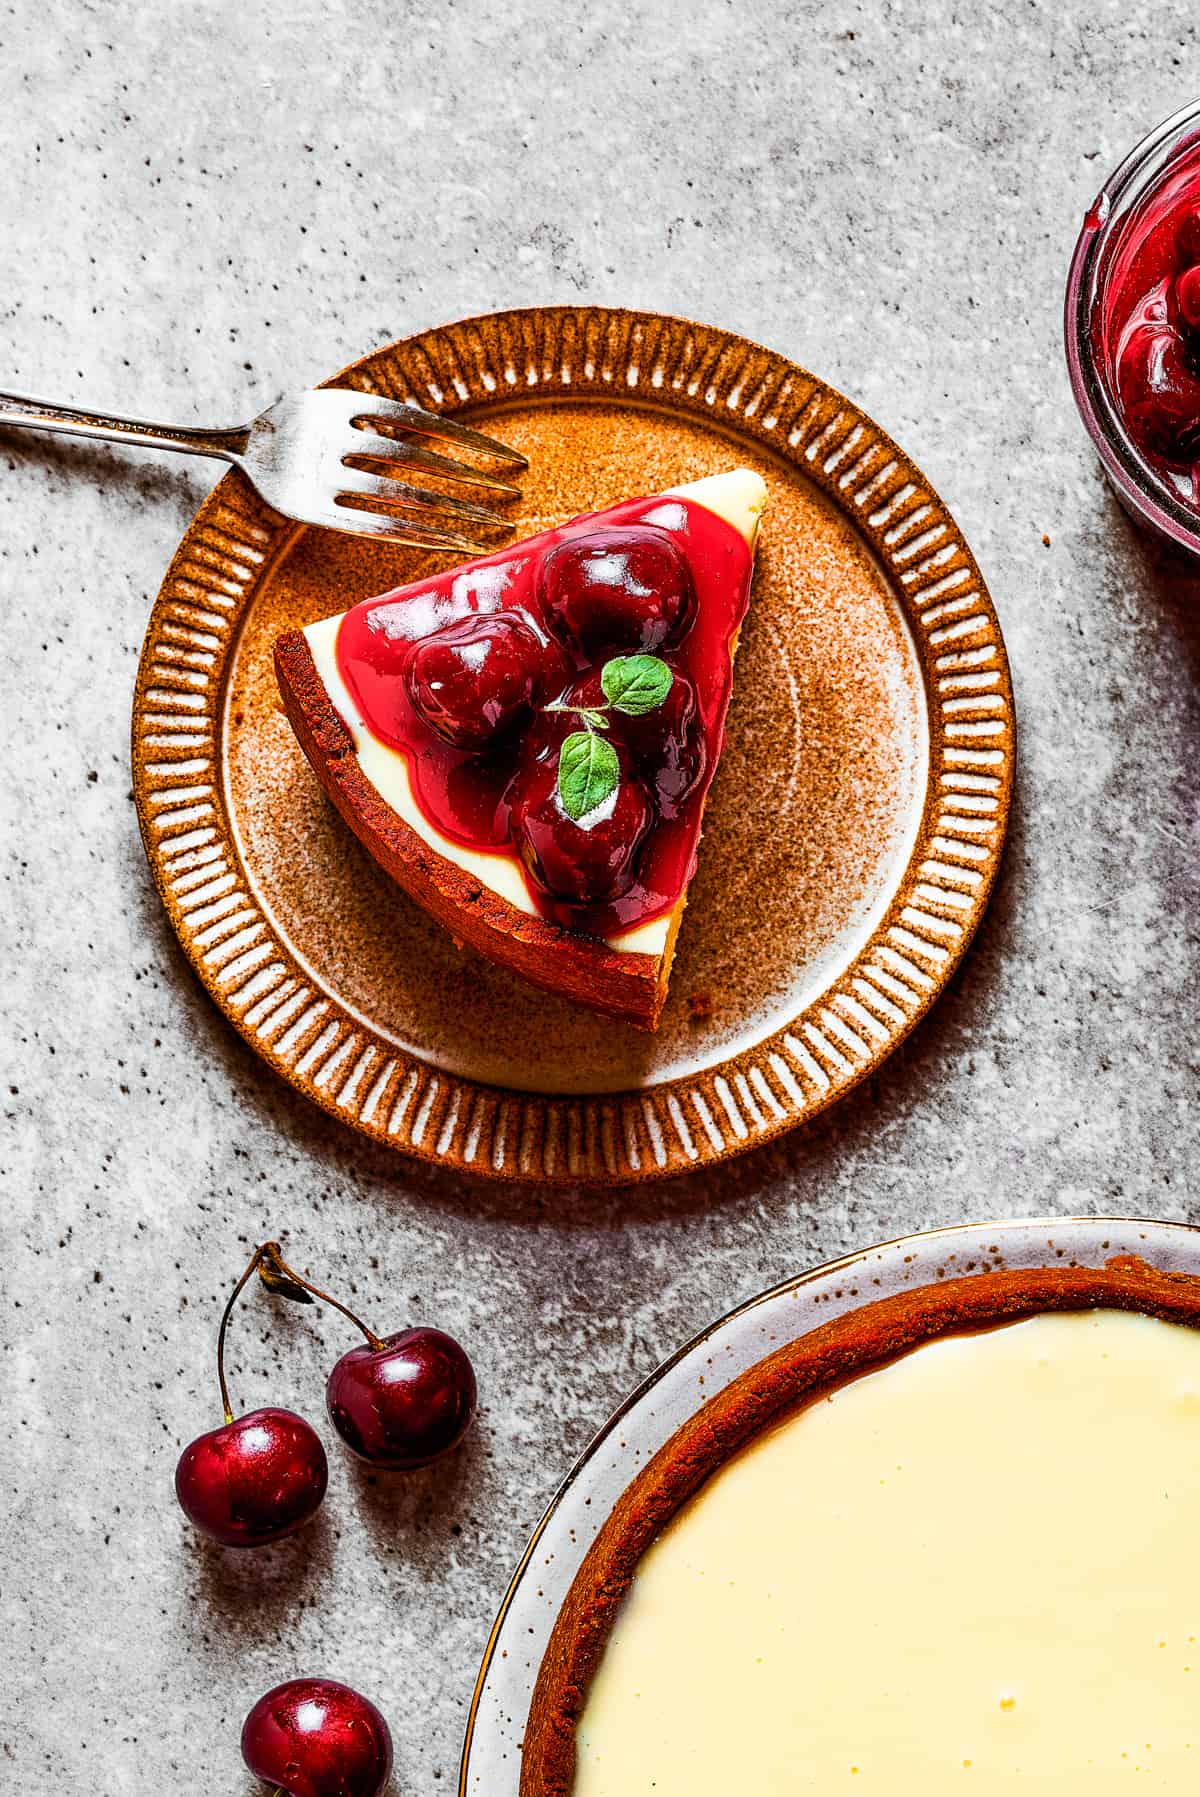 Overhead image of a slice of cheesecake topped with cherries and served on a dessert plate.